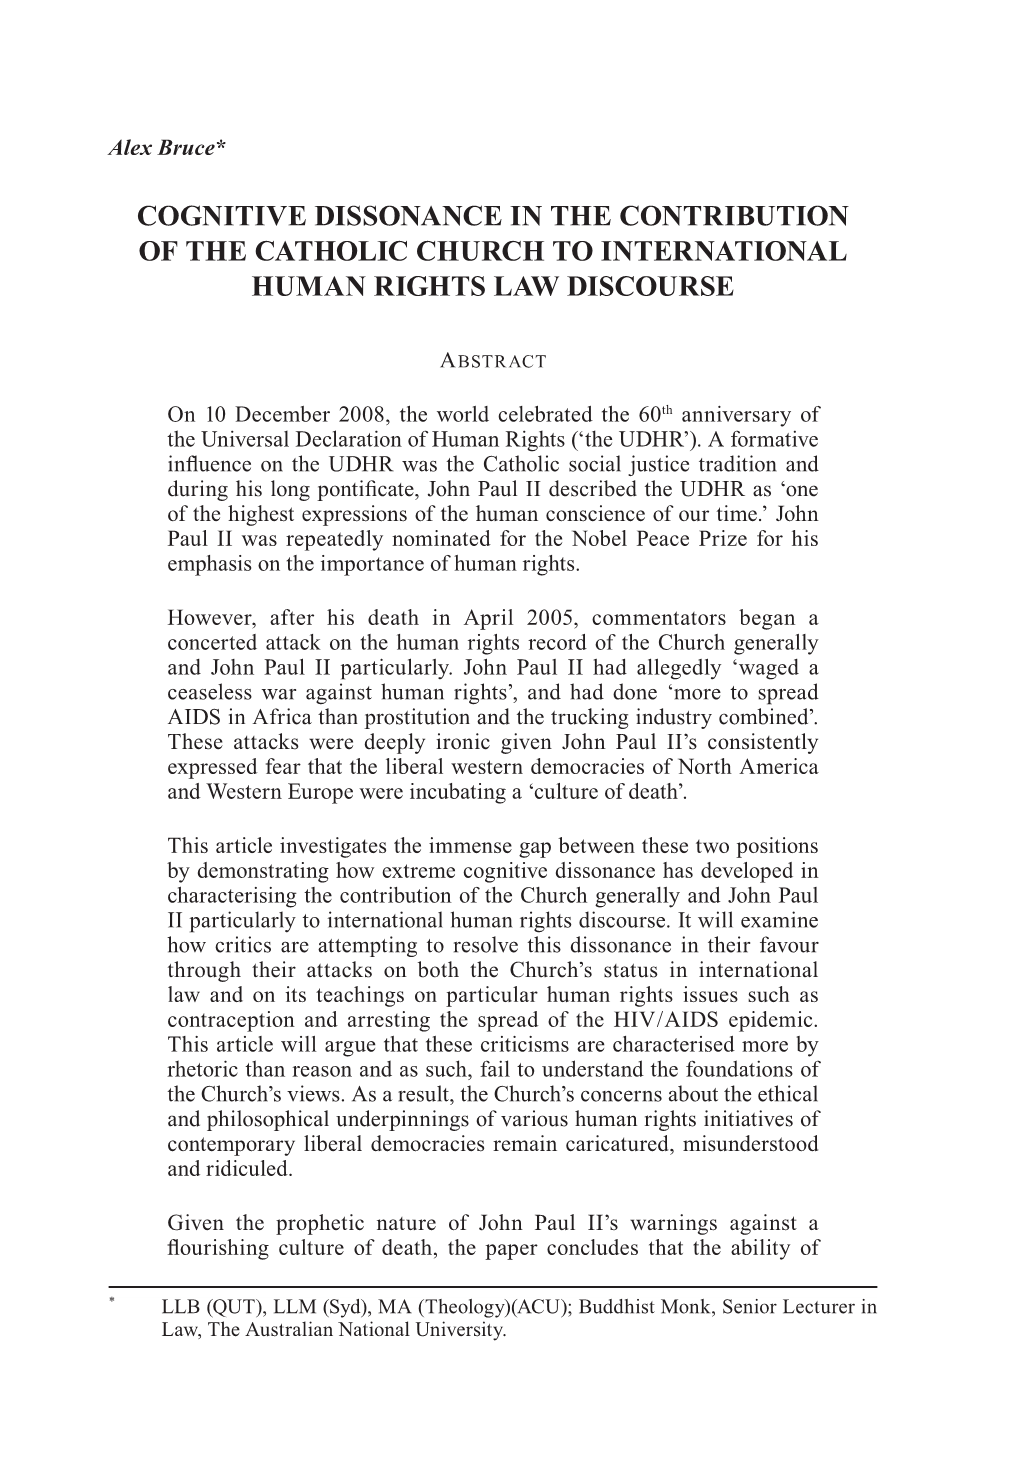 Cognitive Dissonance in the Contribution of the Catholic Church to International Human Rights Law Discourse